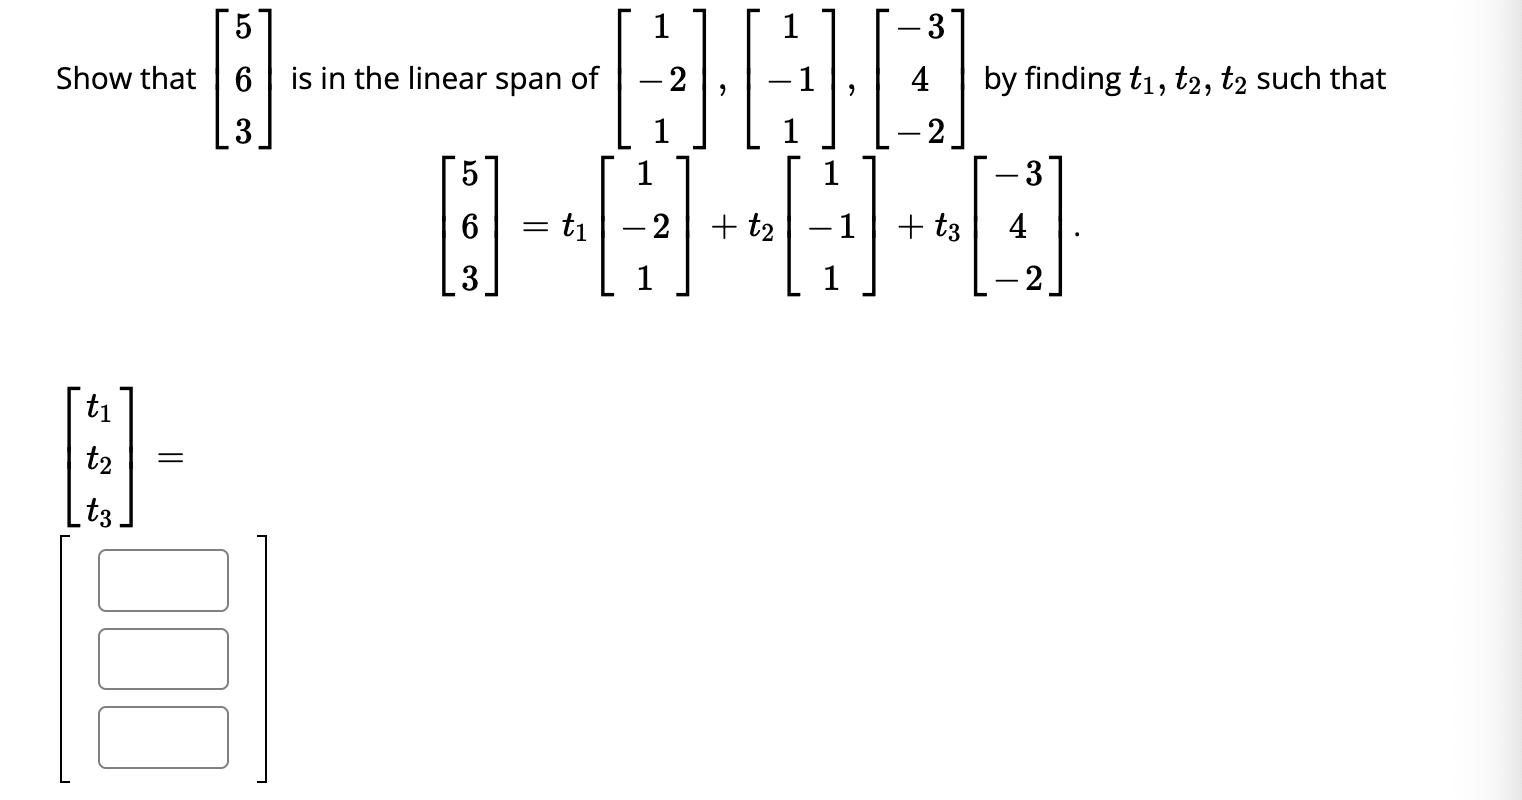 Show that t t2 t3 = 5 H 6 is in the linear span of 3 100 5 4 6 = = t -  1 - 2 + t 1 1 -3 4 + t3 by finding